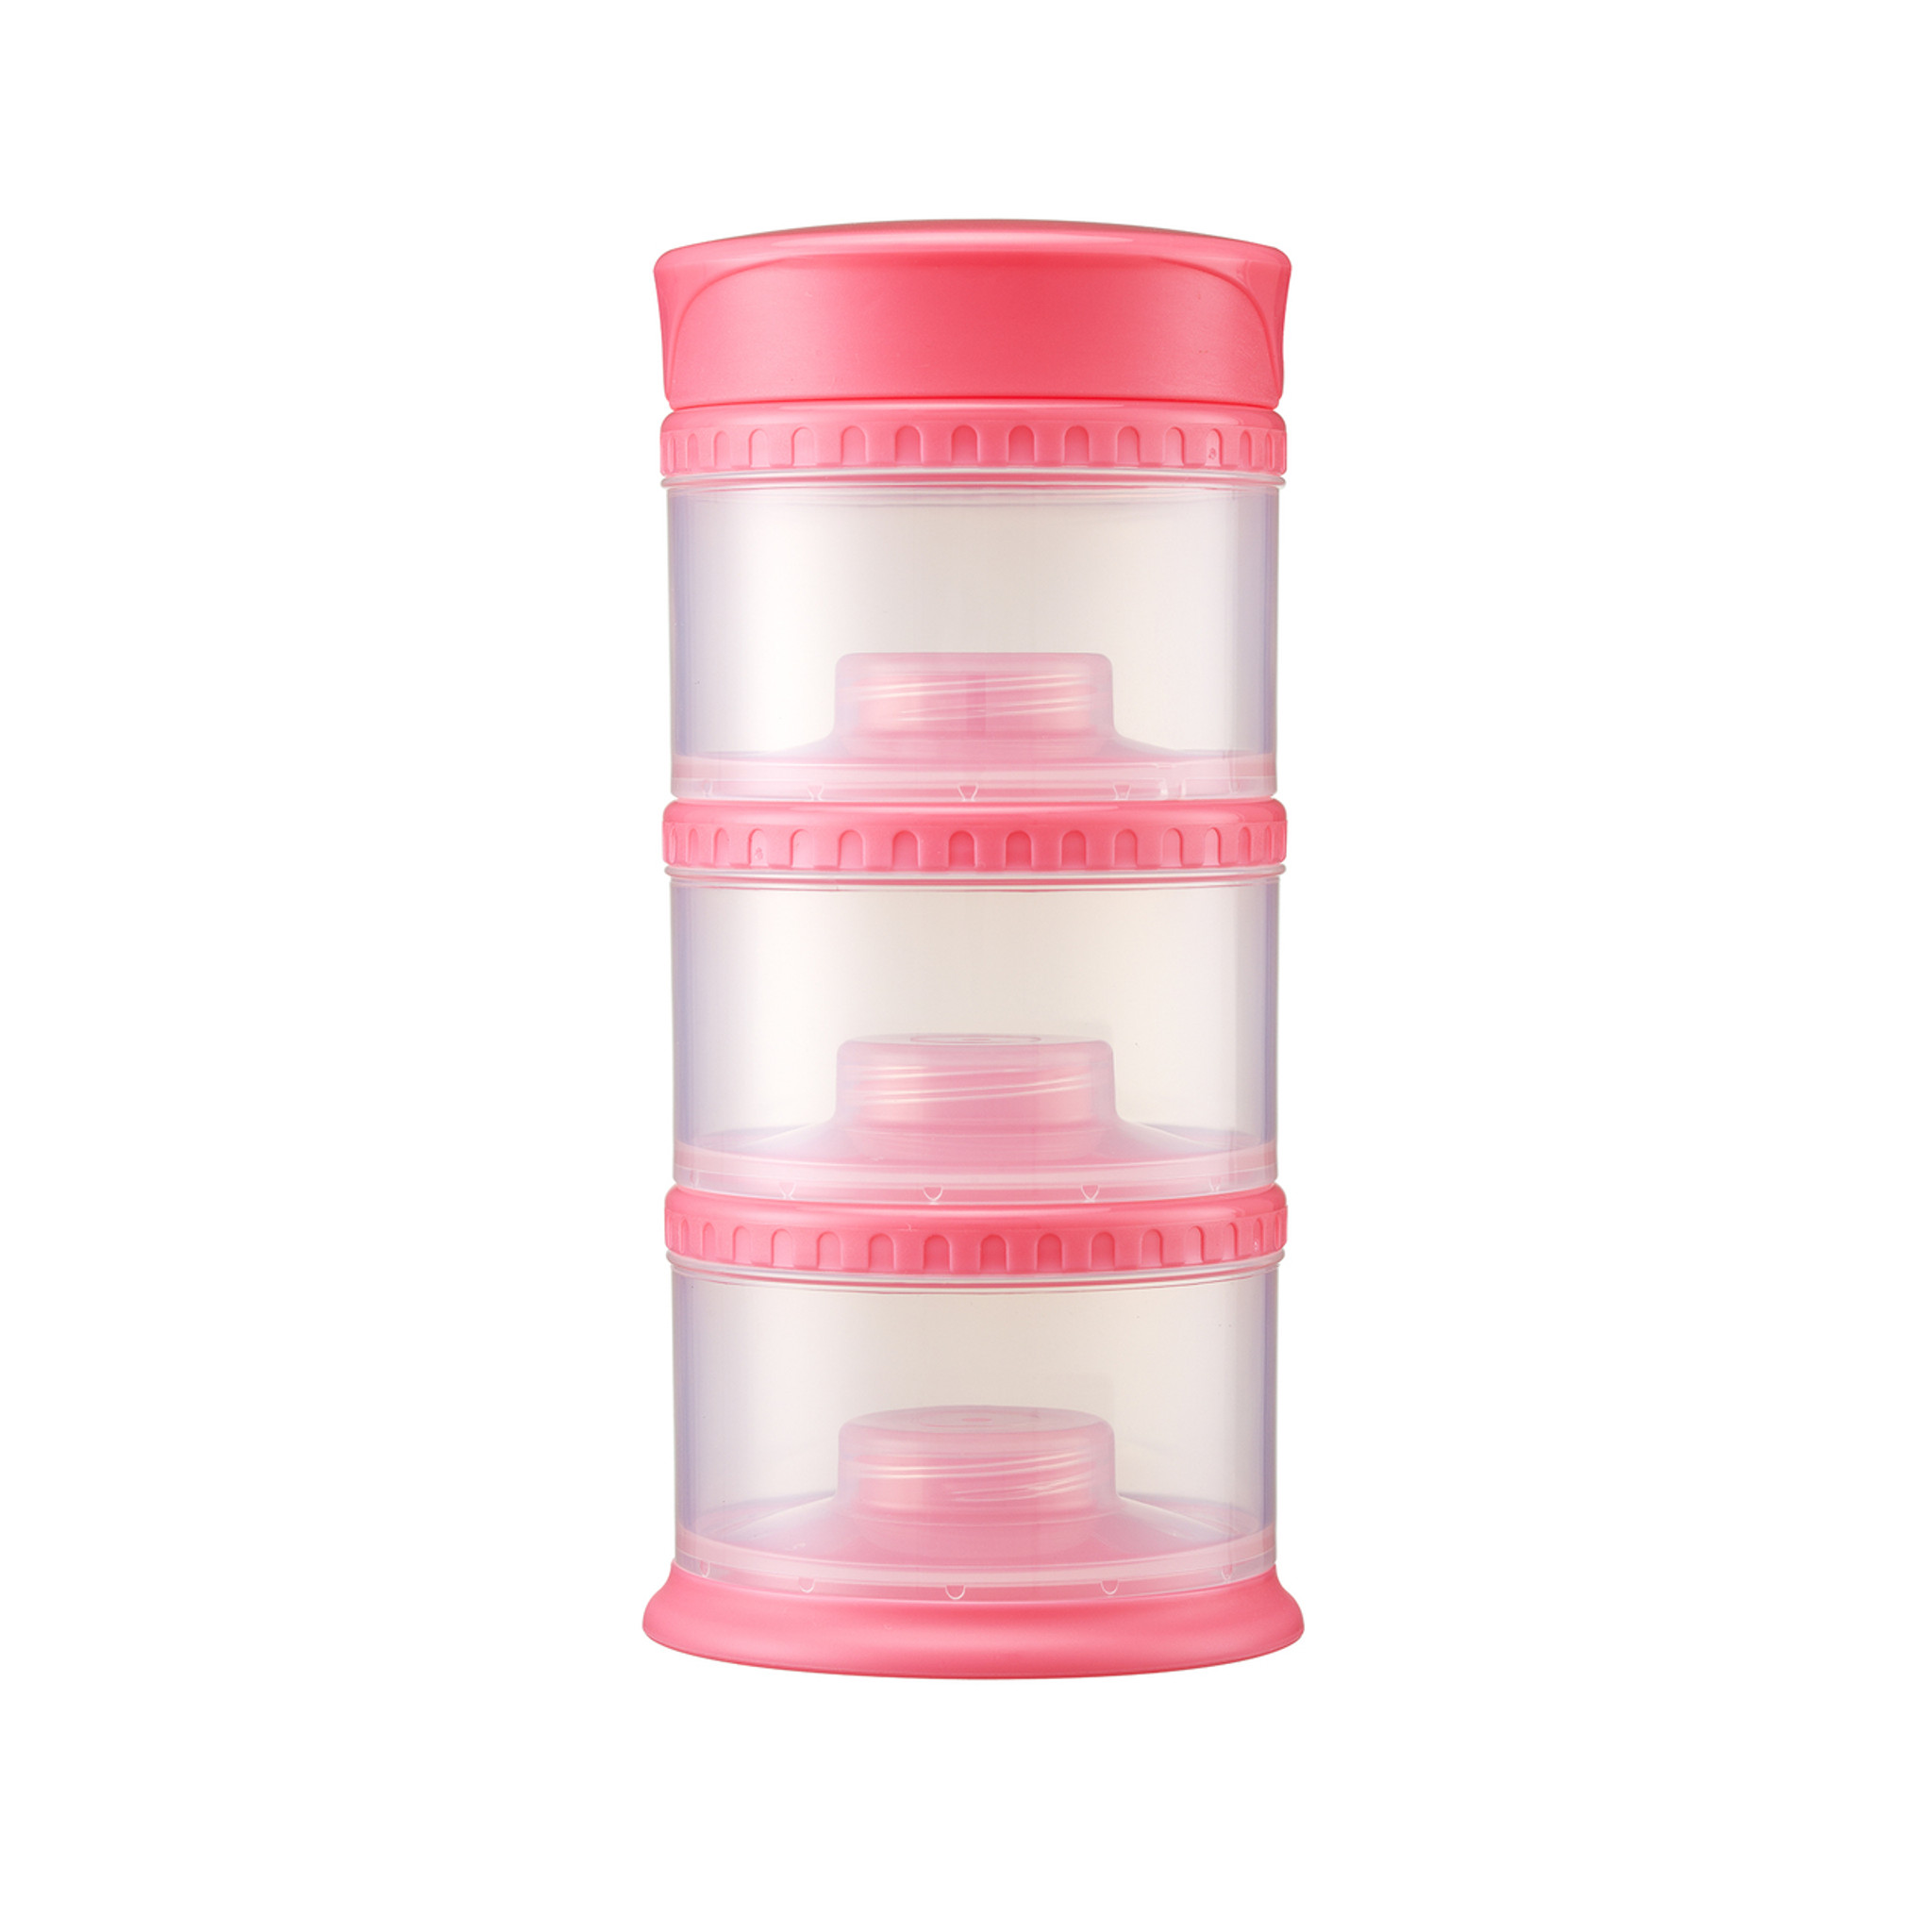 Buy Brilliant Portable Protein Container At Irresistible Deals